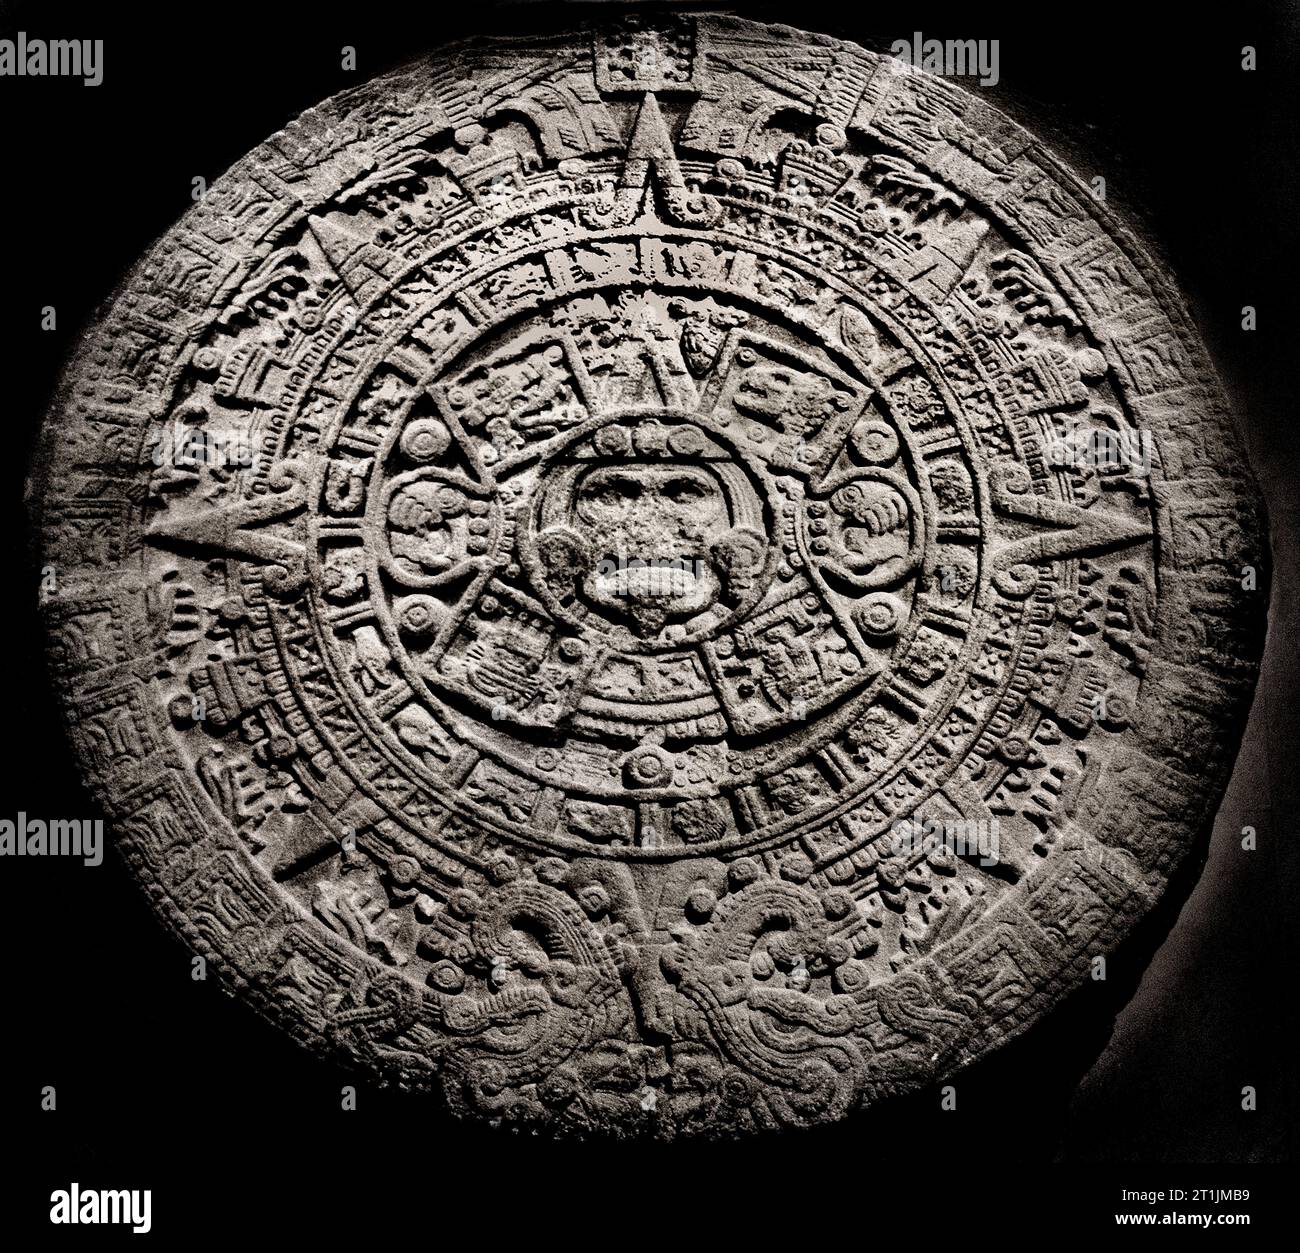 Aztec Stone of the Sun, The Aztec calendar stone, Sun stone, or Stone of the Five Eras is a late post-classic Mexican sculpture saved in the National Anthropology Museum, Mexico City and is perhaps the most famous work of Aztec sculpture. Circa 15th century. Stock Photo